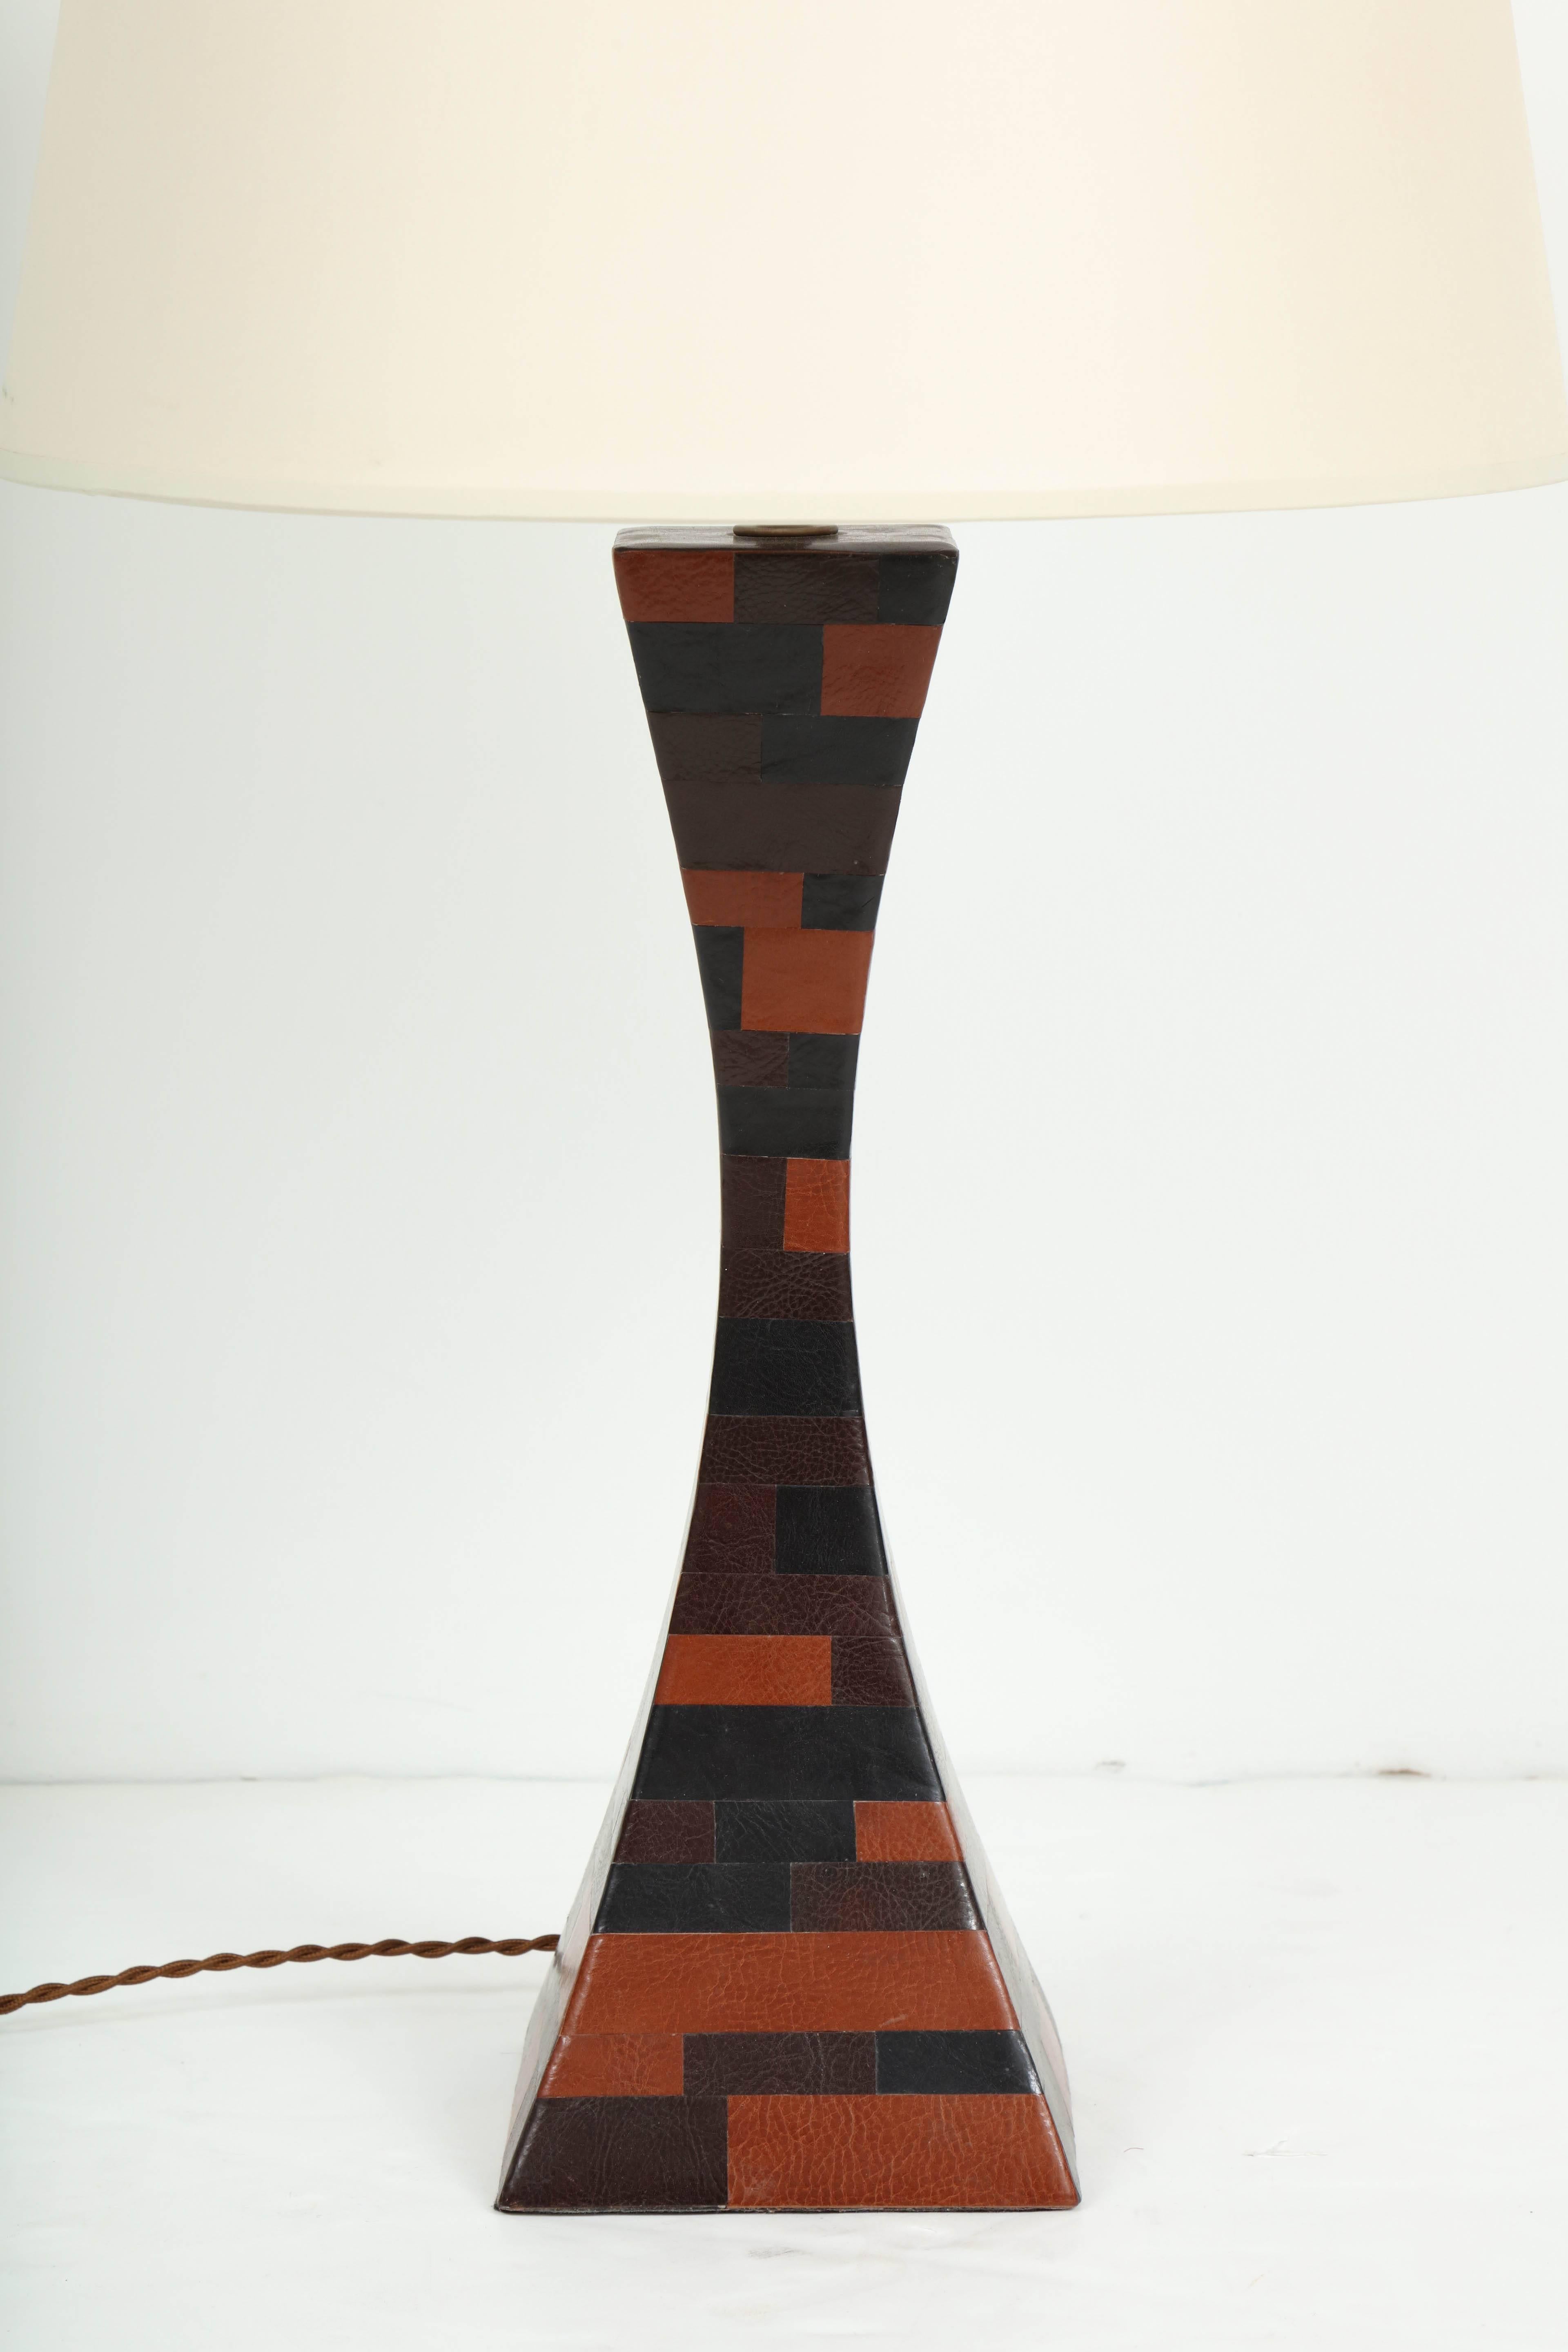 Double splayed table lamp in the manner of Stewart Ross, circa 1970 clad in brown patchwork leather.